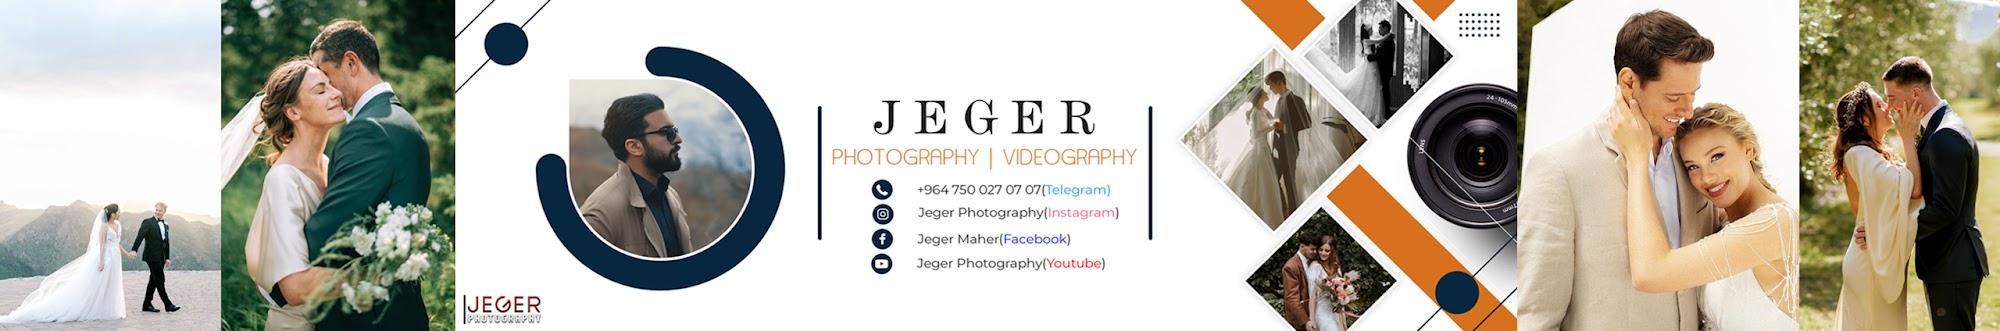 Jeger Photography